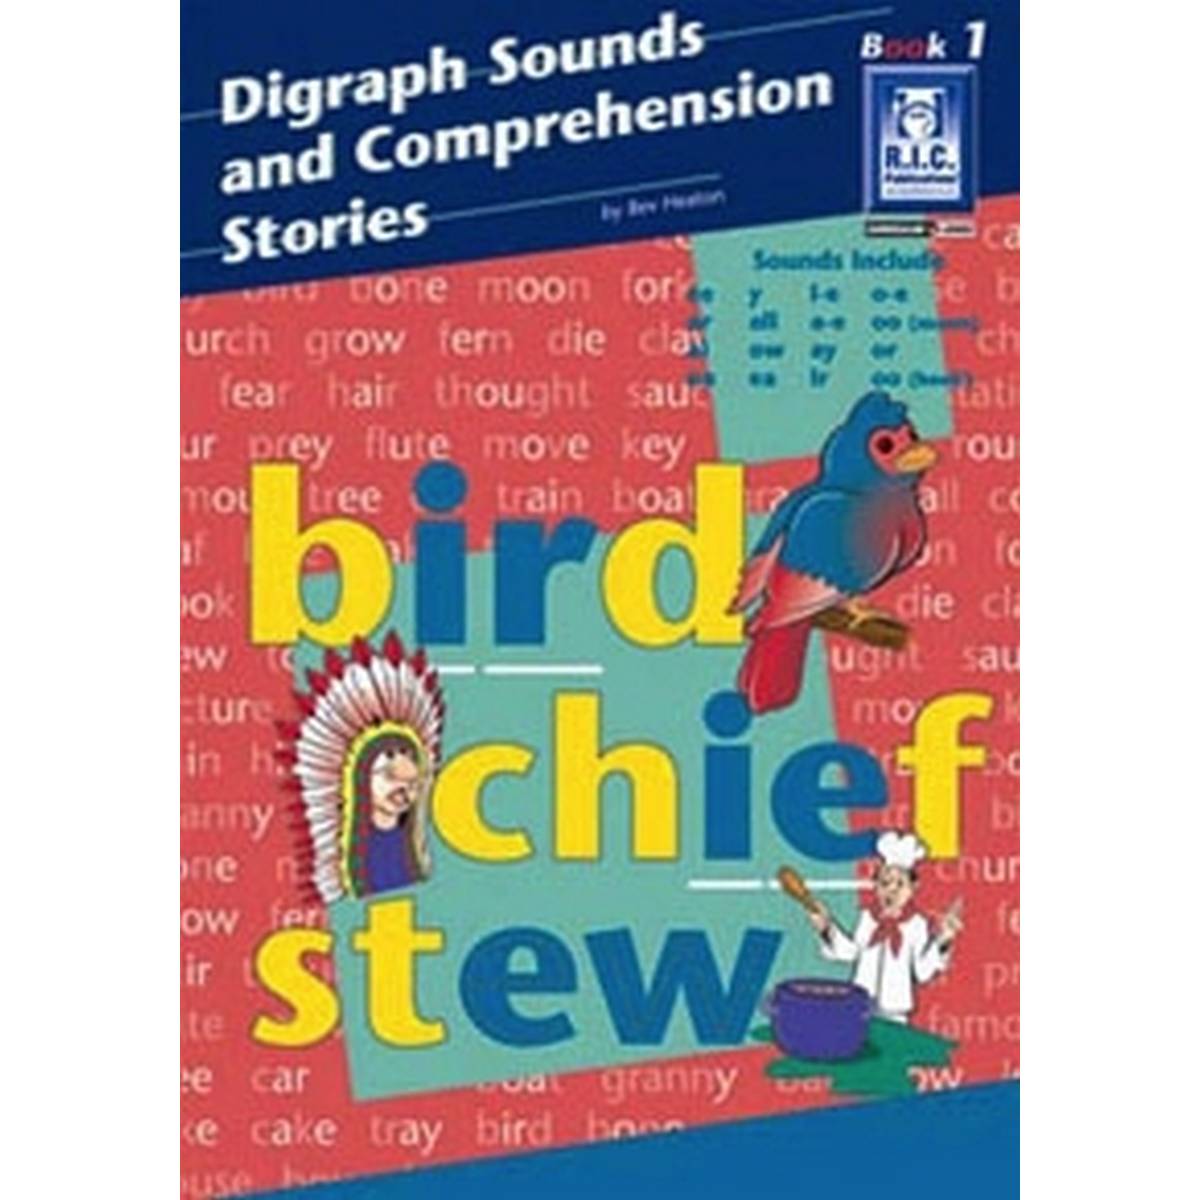 Digraph Sounds and Comprehension Stories 1